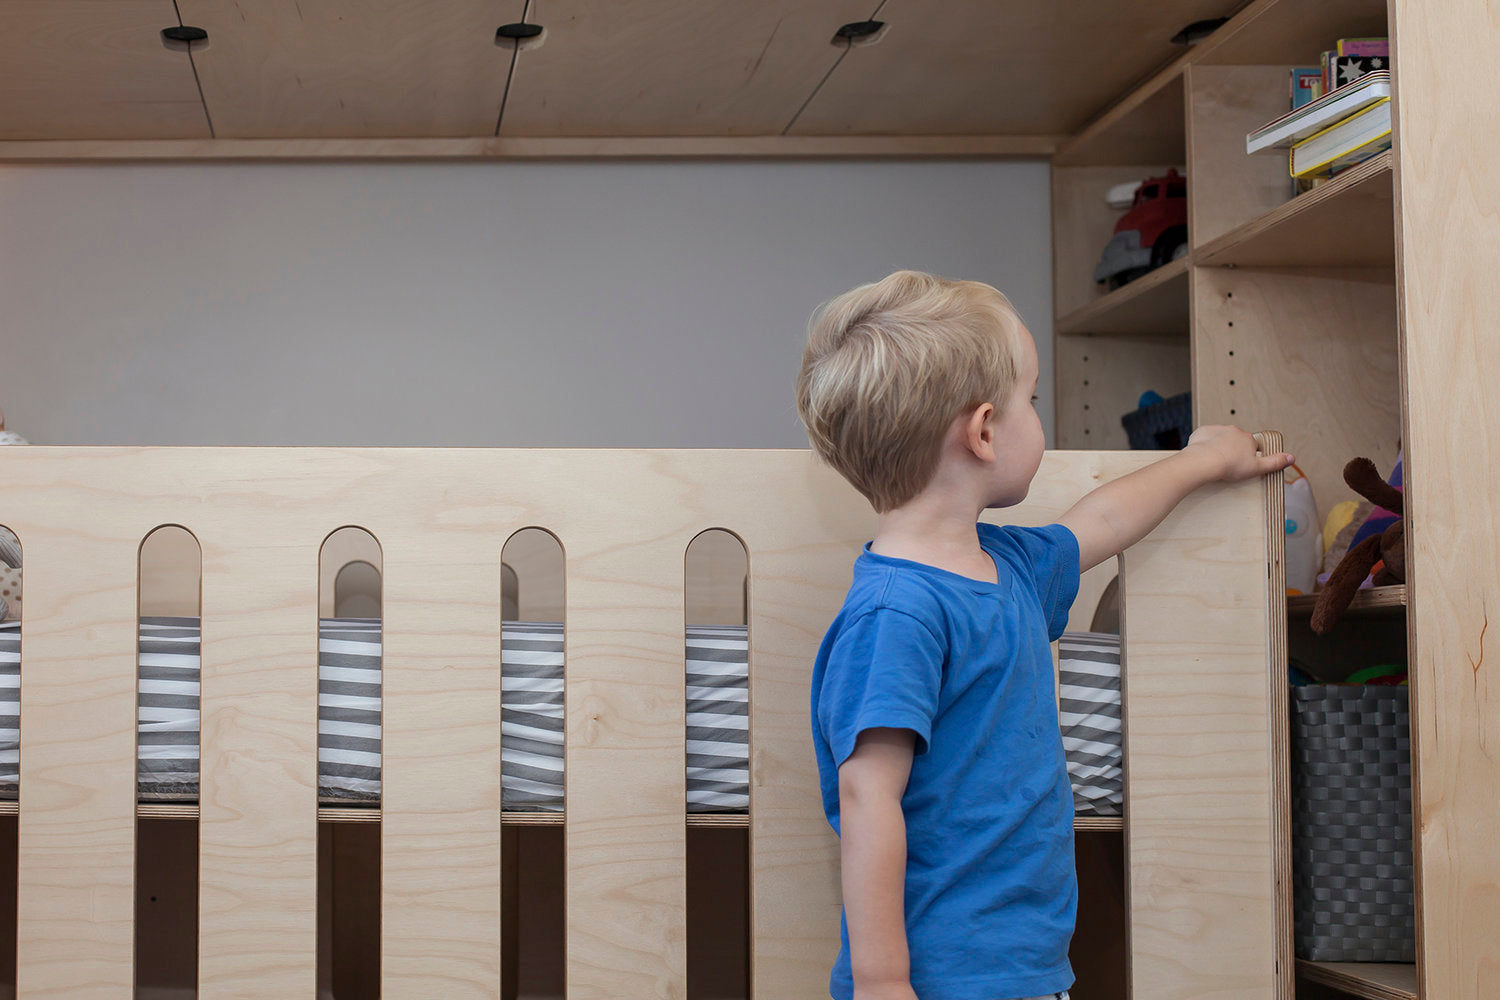 Child in blue shirt reaching for shelf on wooden bunk bed with books.